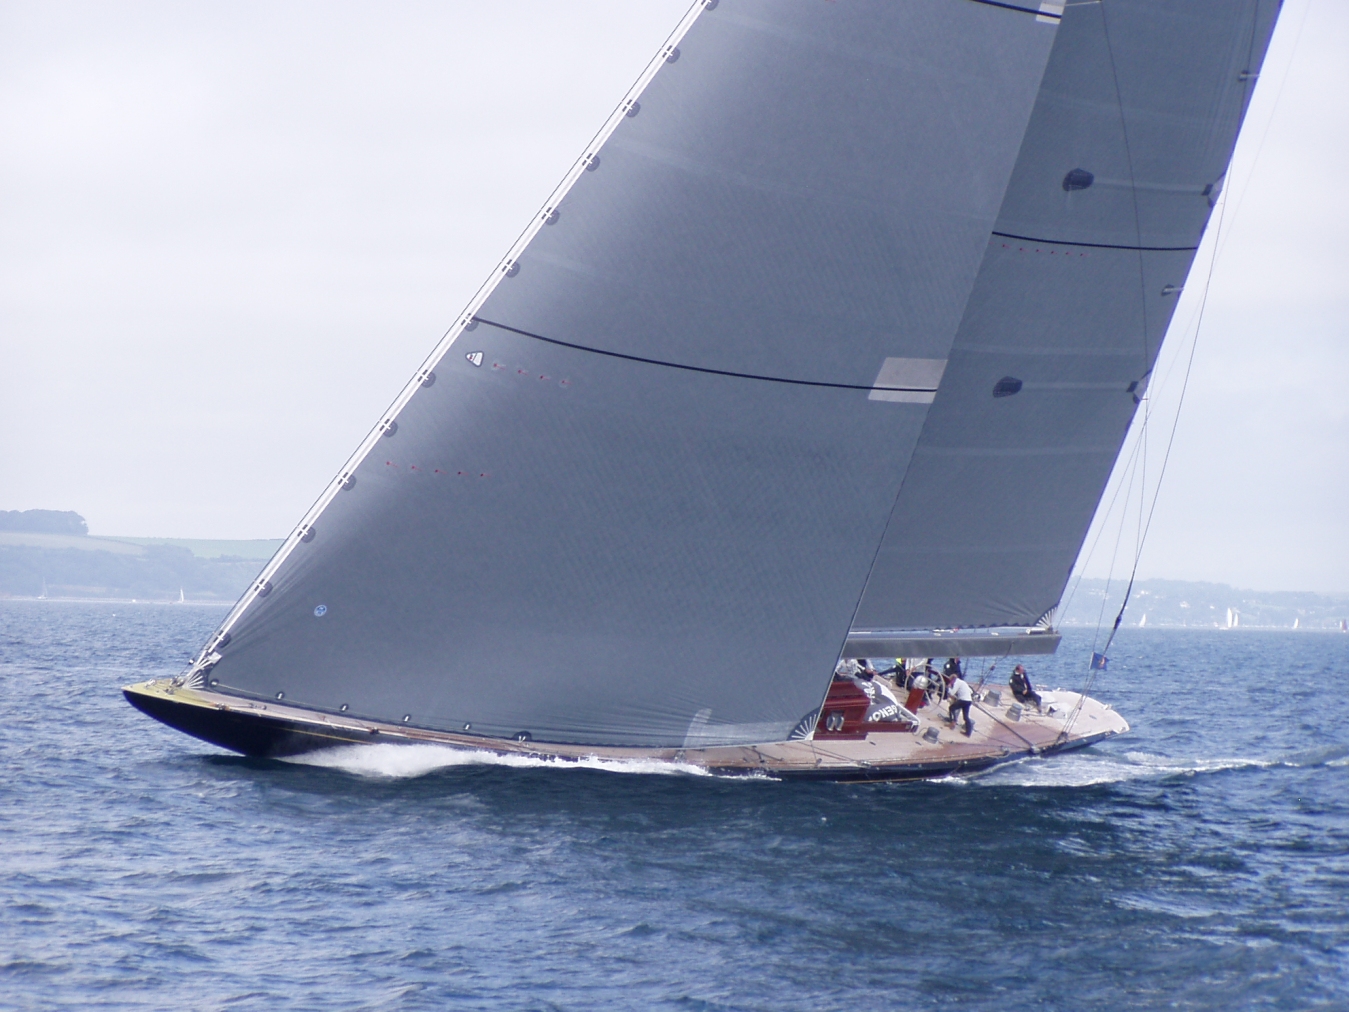 Class yachts racing at Falmouth – photos by Marcus Lewis 